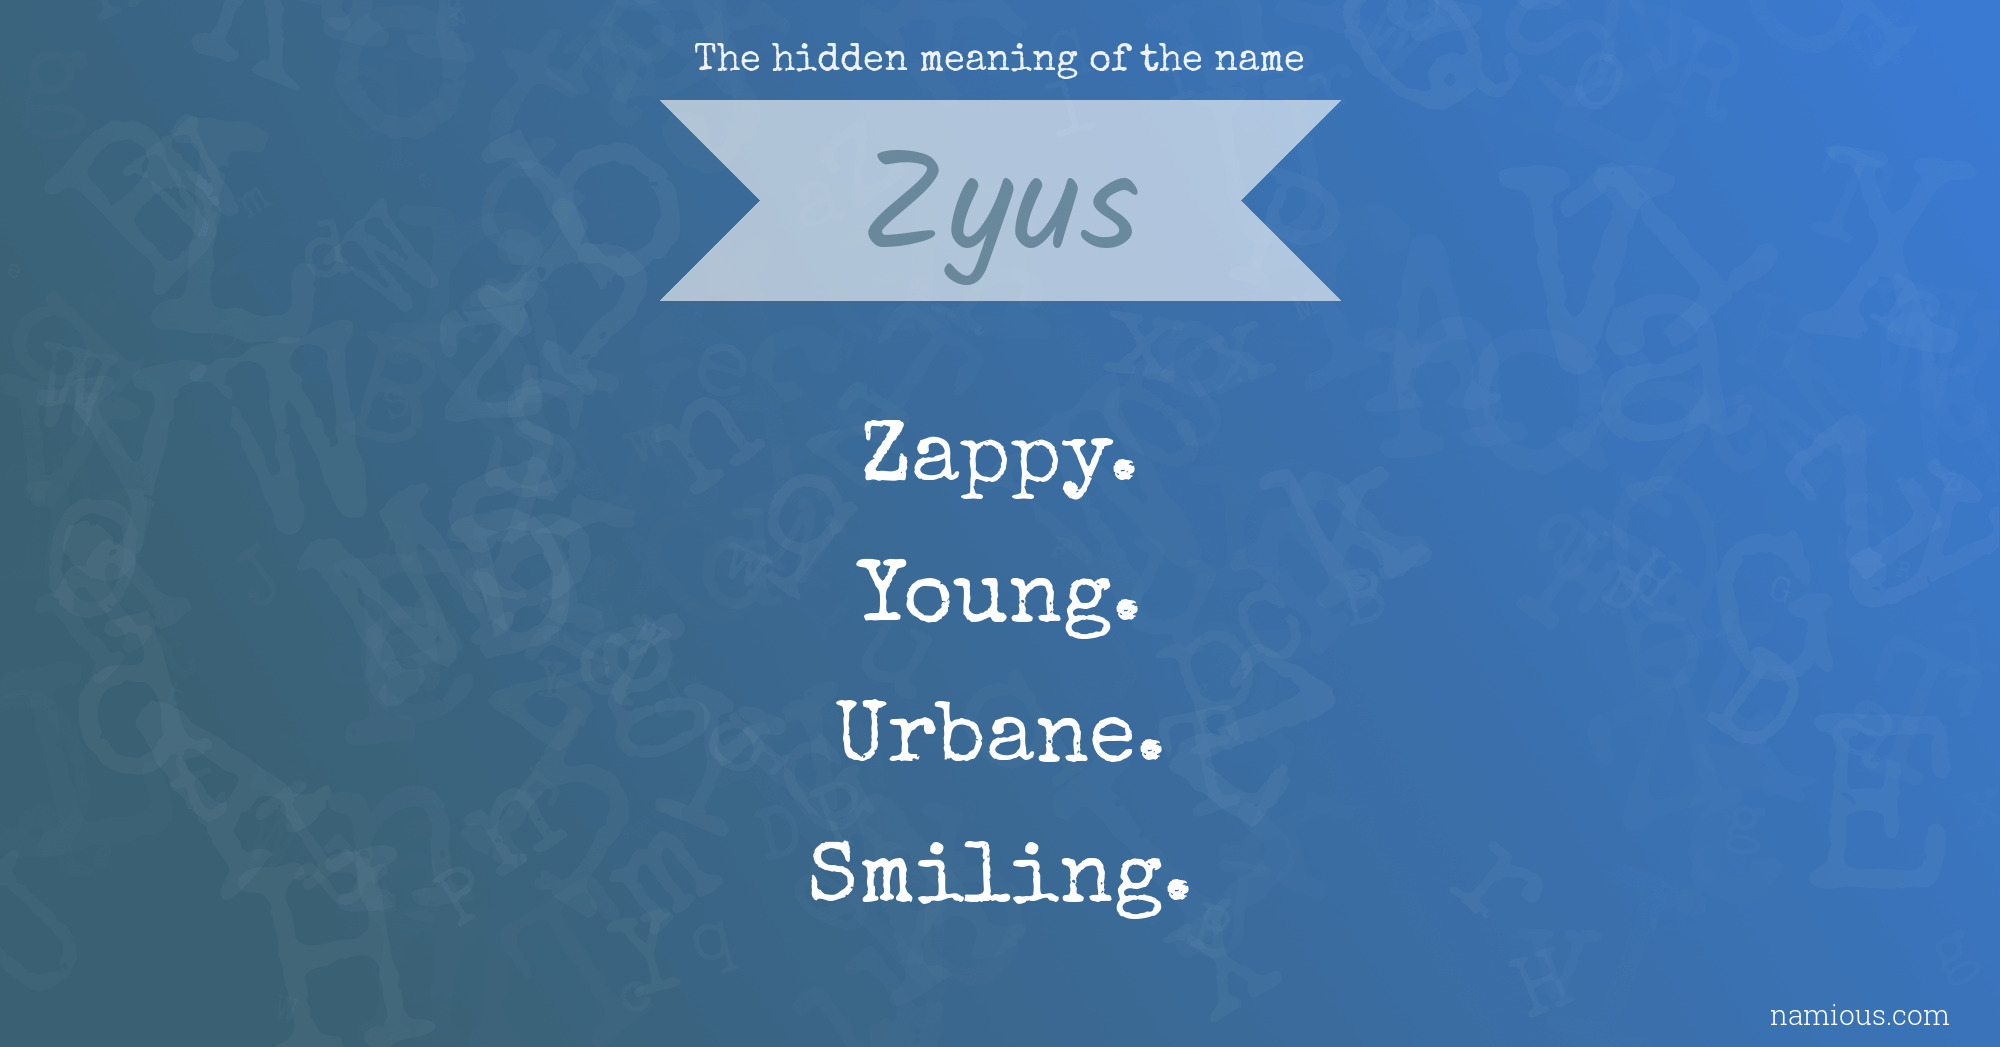 The hidden meaning of the name Zyus